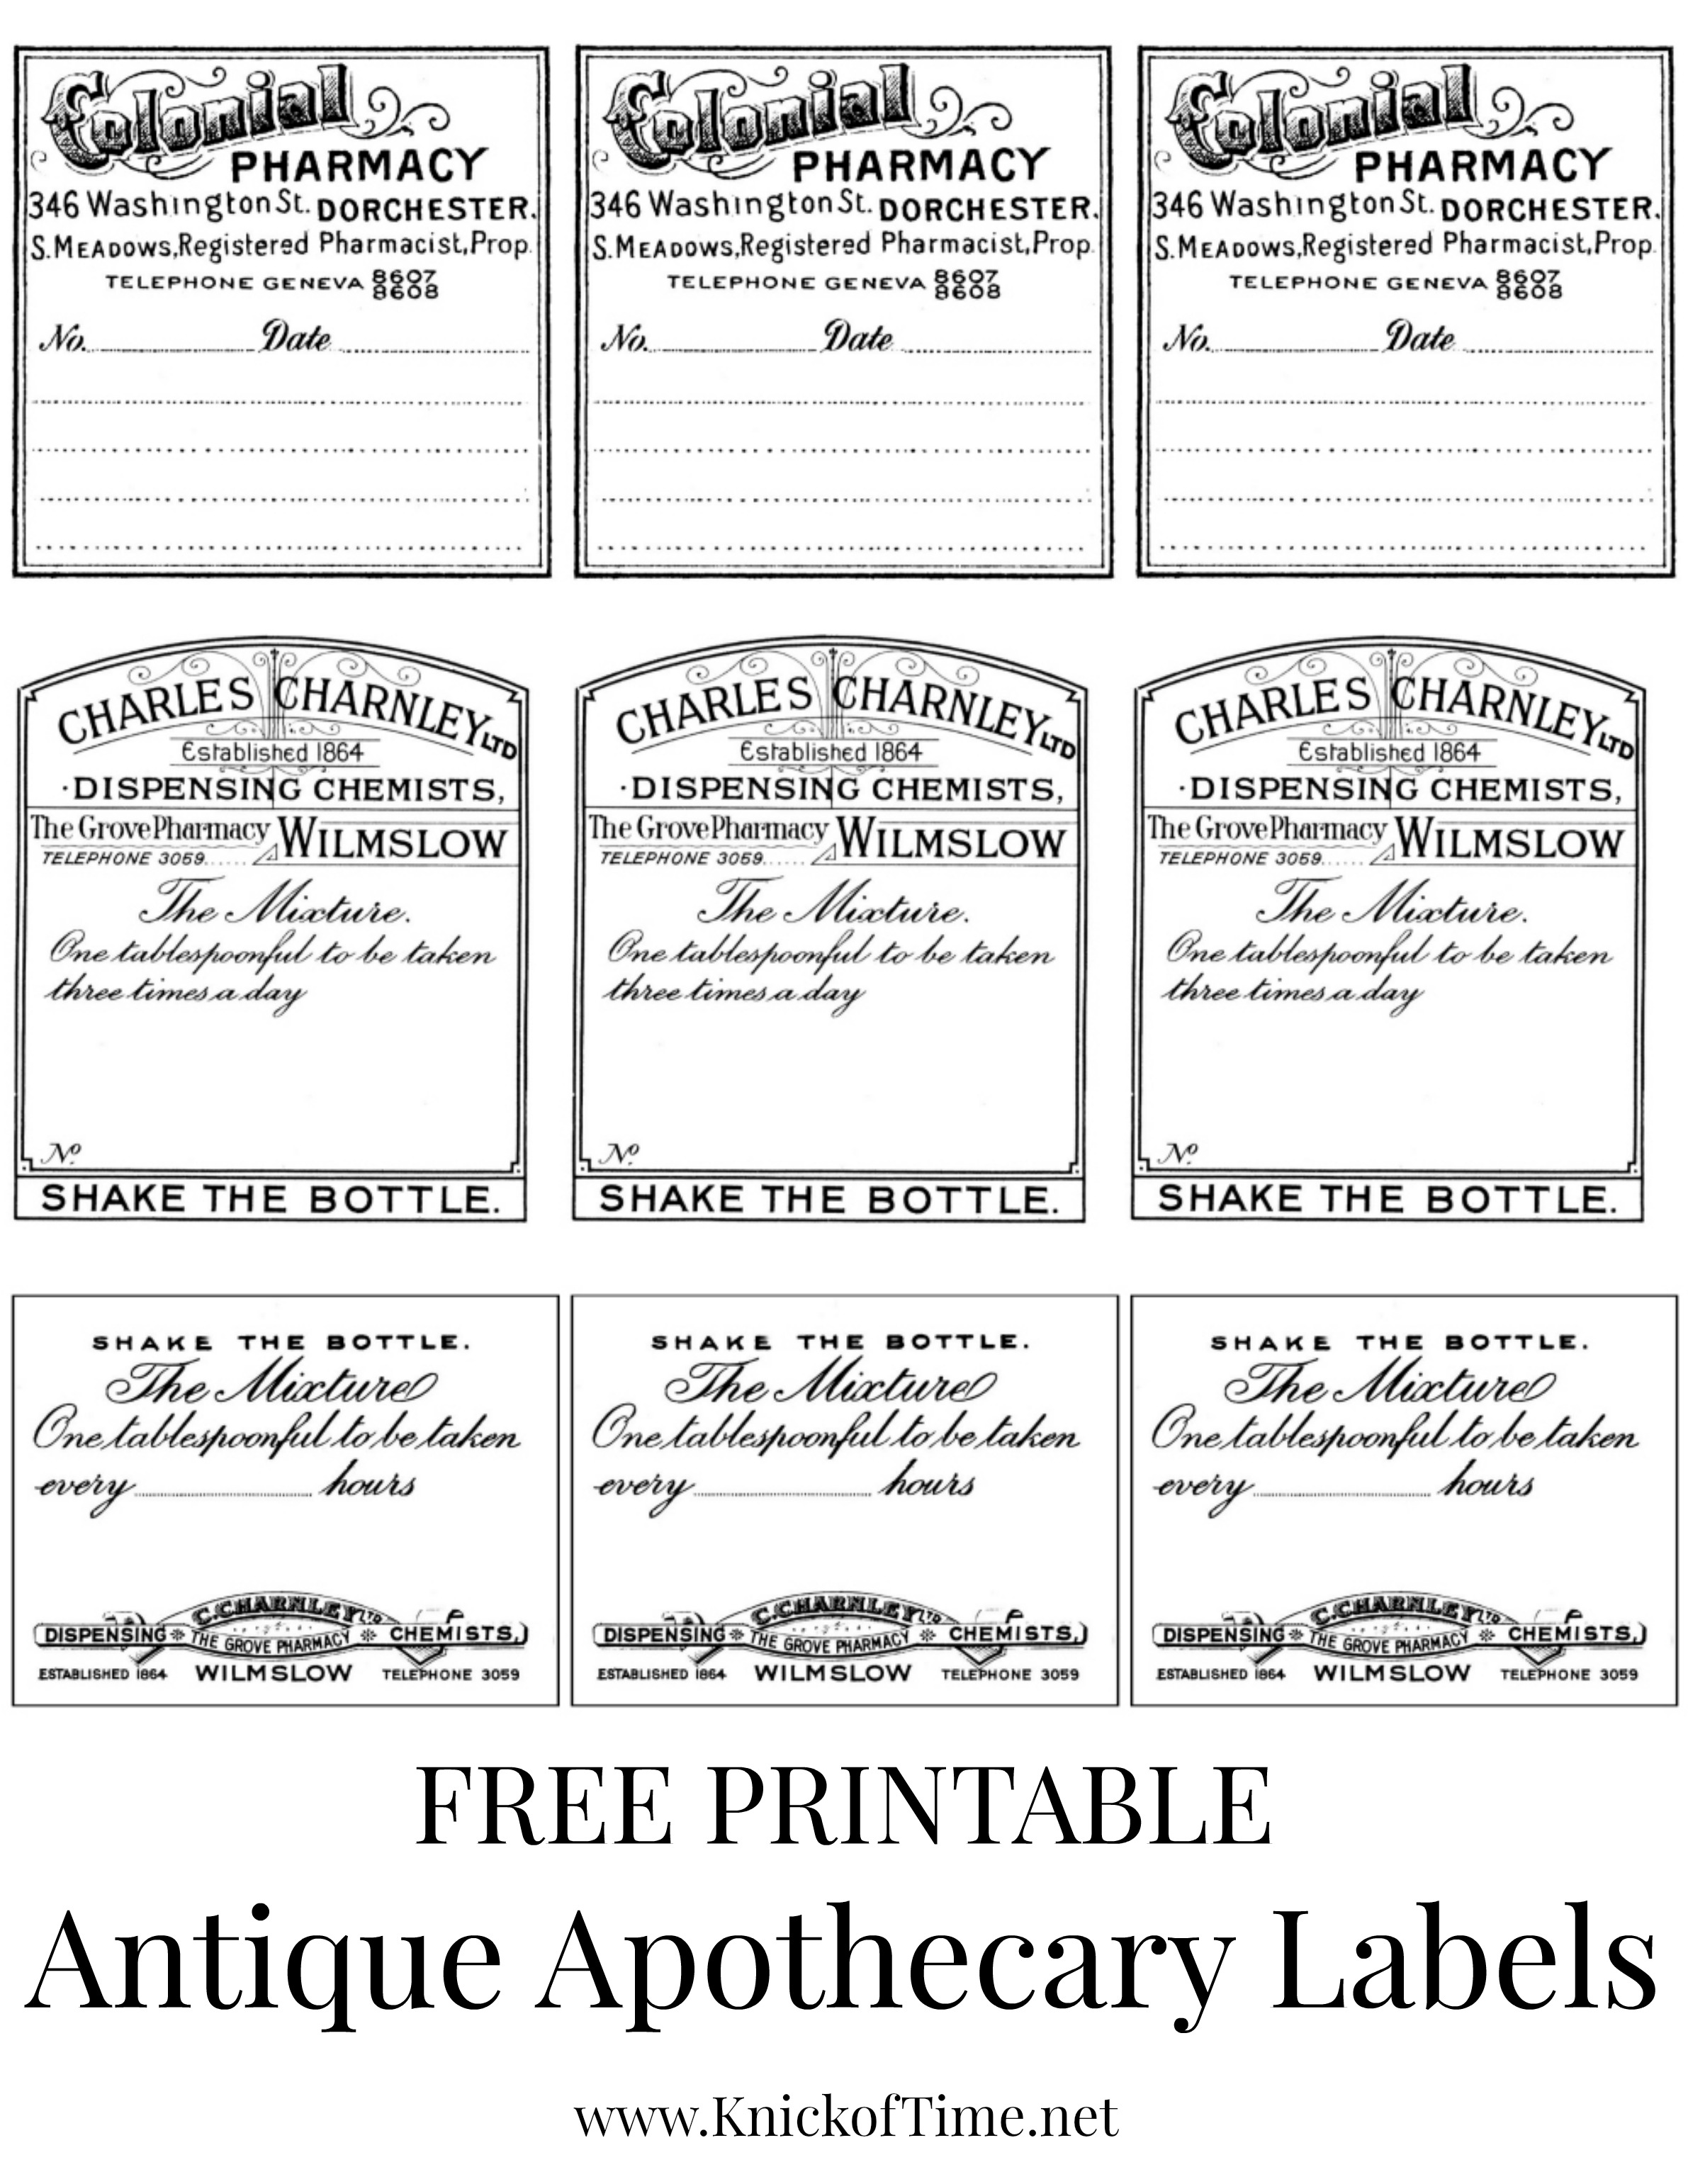 free-printable-apothecary-bottle-labels-from-knick-of-time-jpg-2382